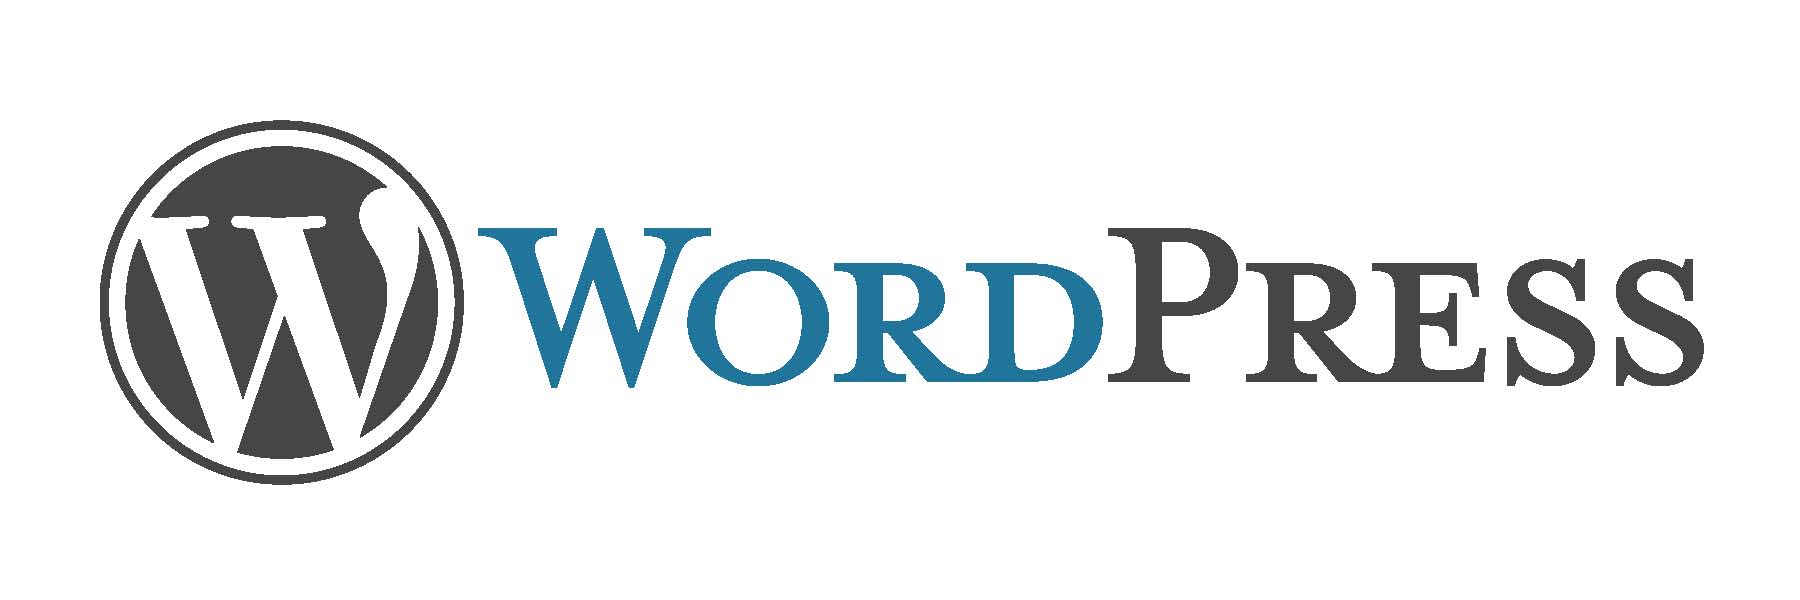 What is WordPress ? what is wordpress used for ?